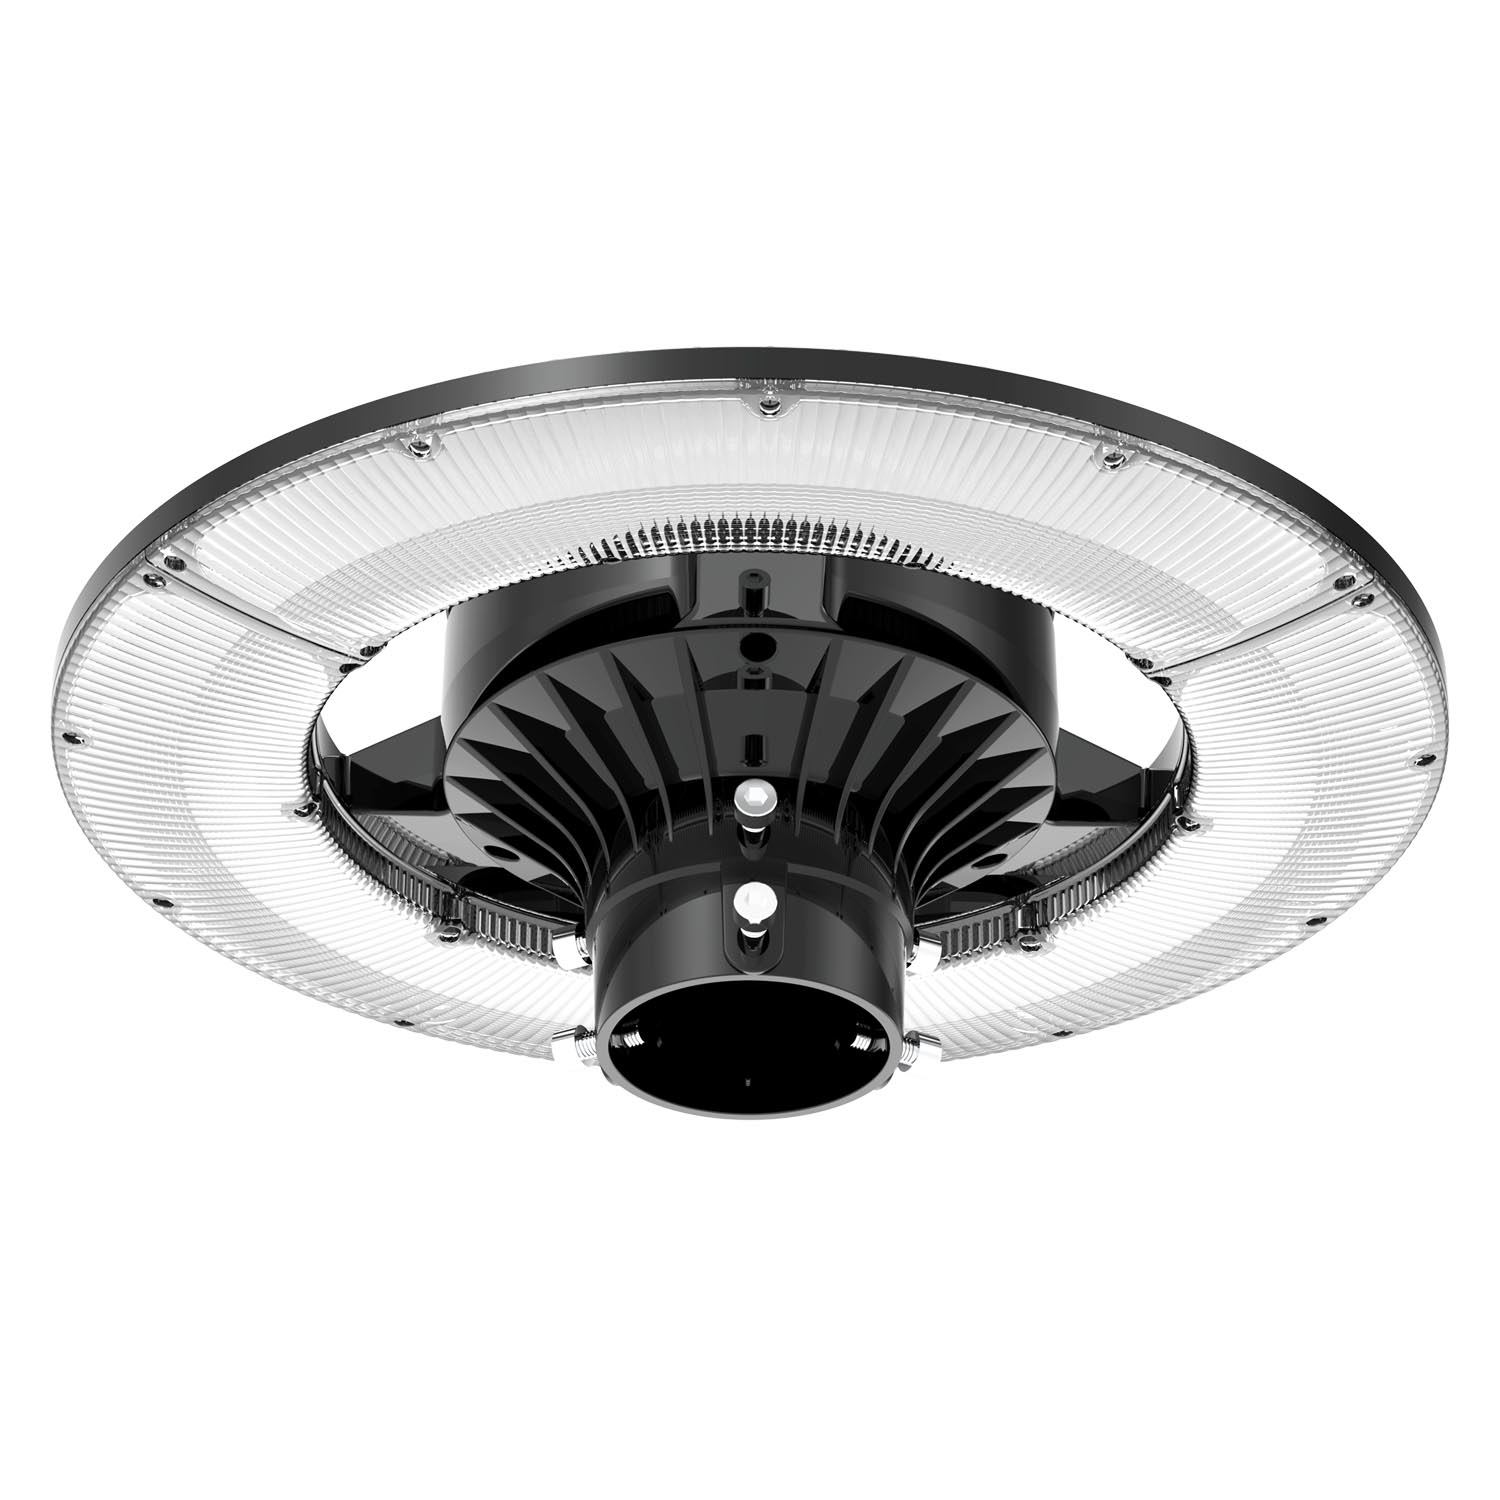 120W LED Post Top Luminaire, 3CCT, 15600lm, 5 Year Warranty, 250w HID Replacement, Diamond-PD Range